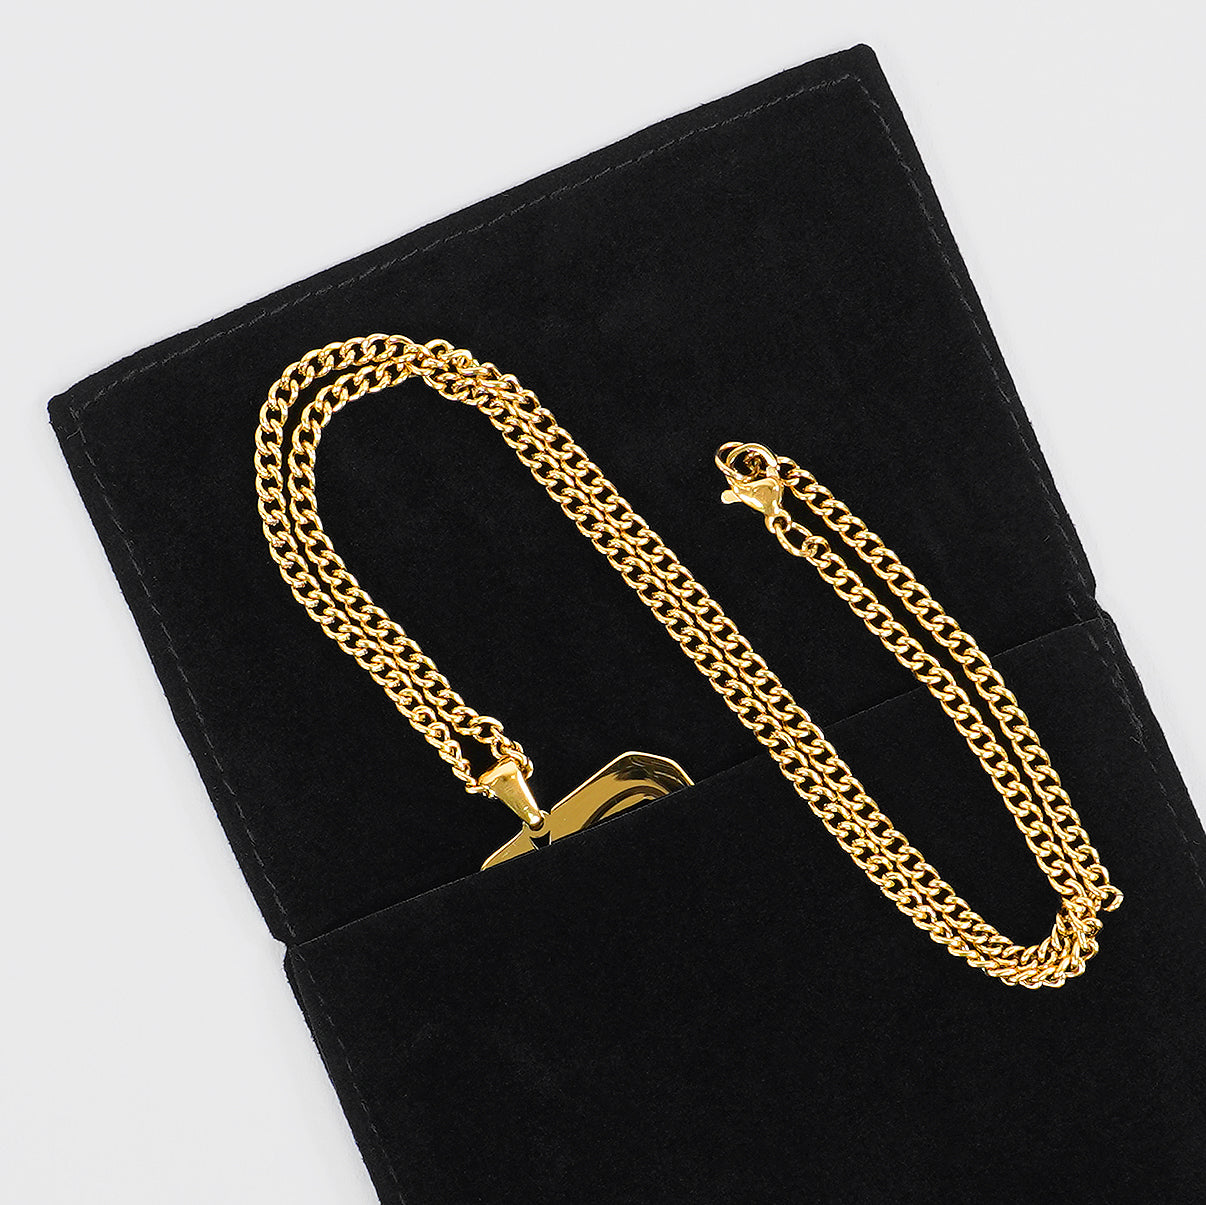 97 Number Pendant with Chain Necklace - Gold Plated Stainless Steel